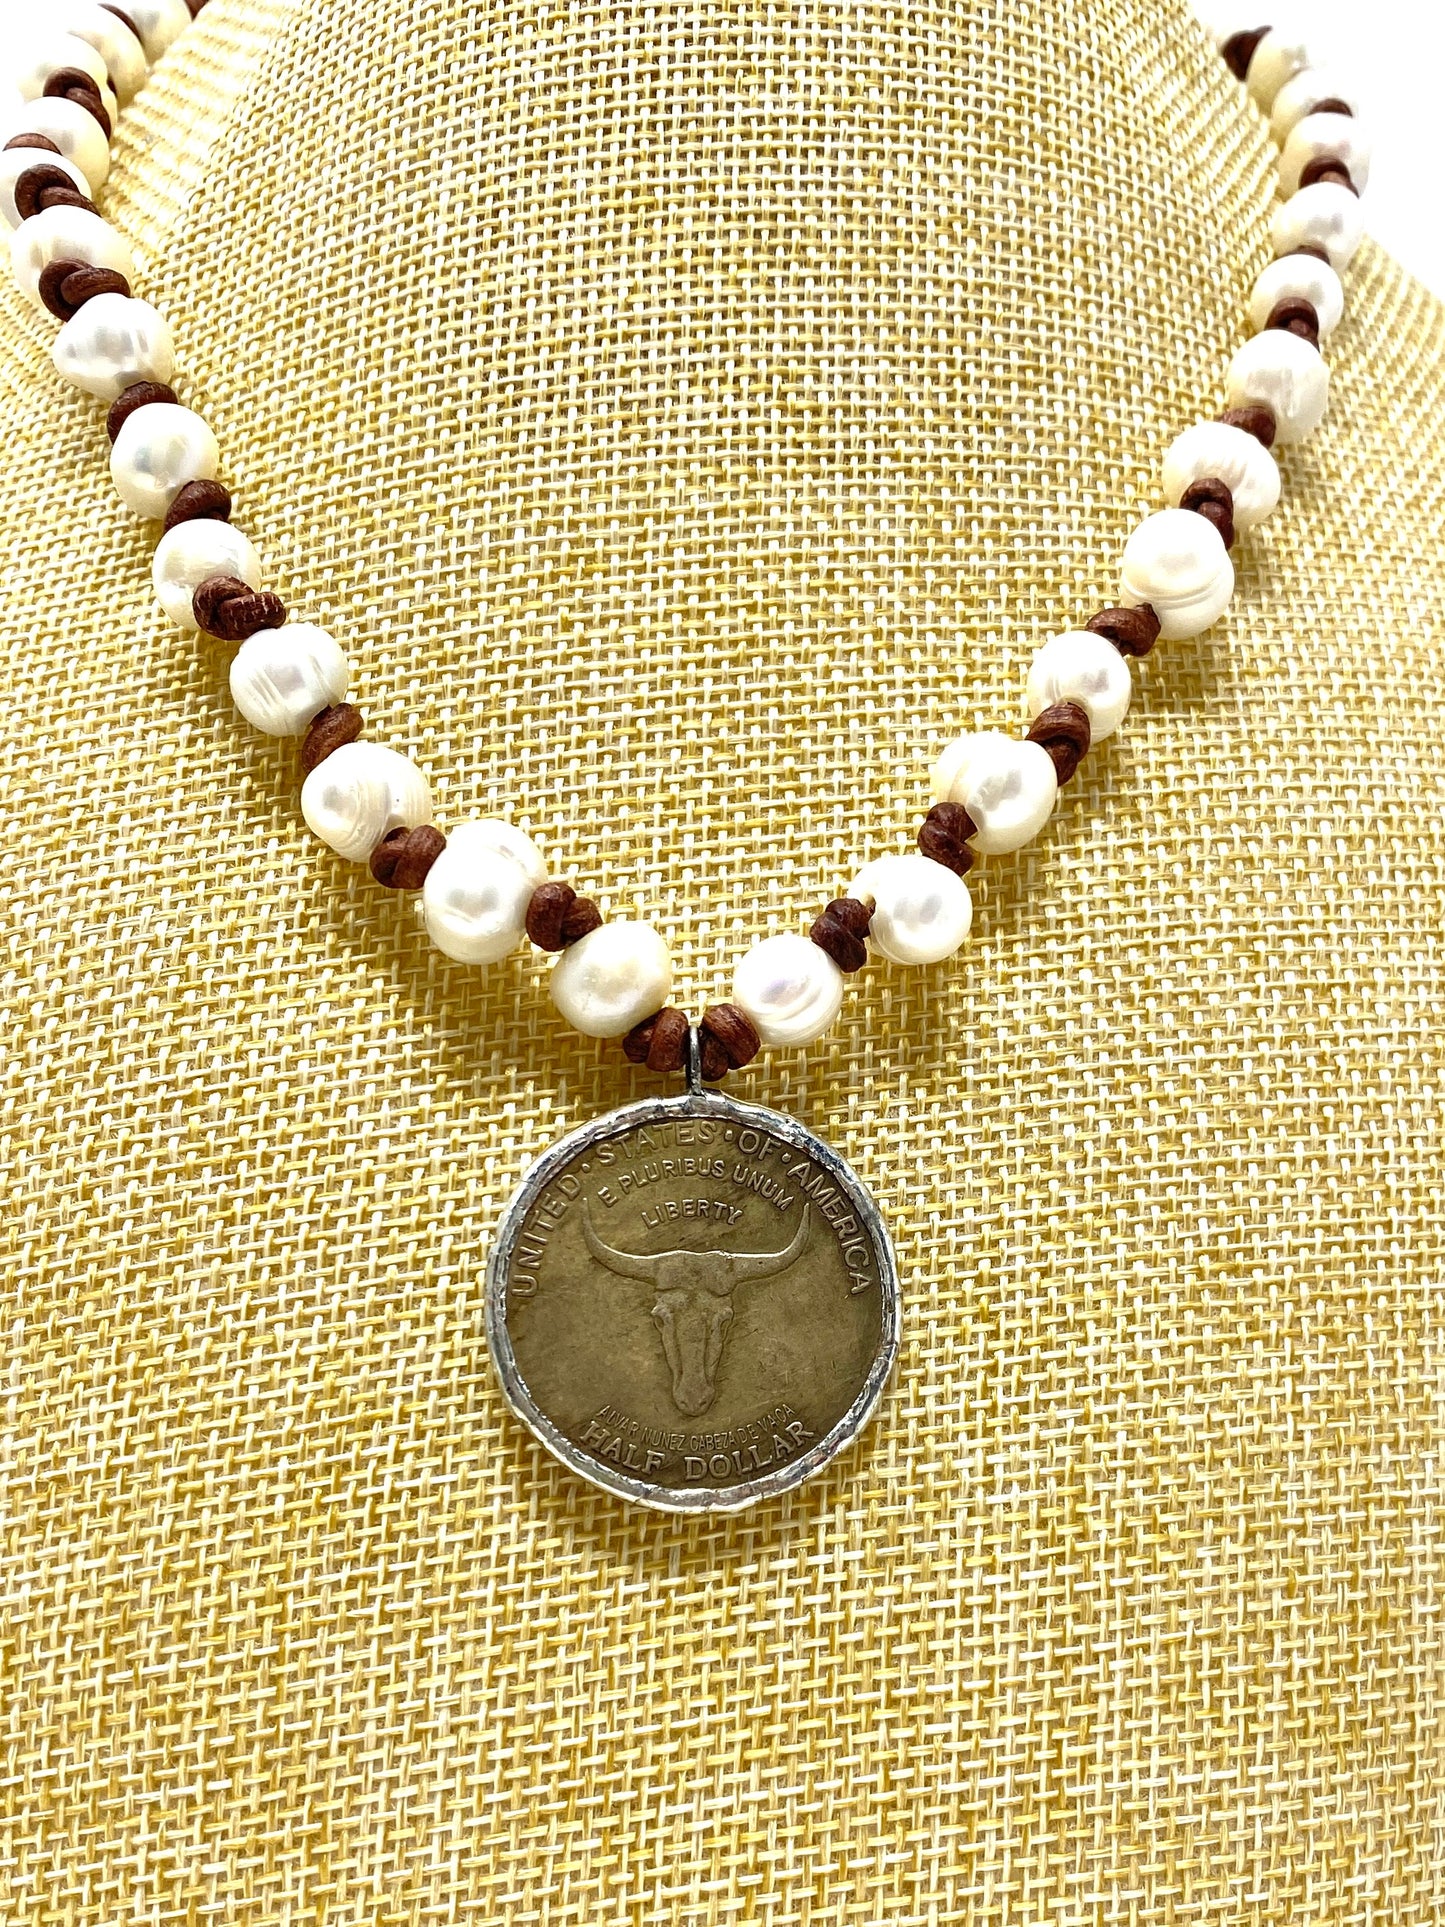 Vintage Longhorn Coin Medallion on Handknotted Leather With Freshwater Pearl Necklace